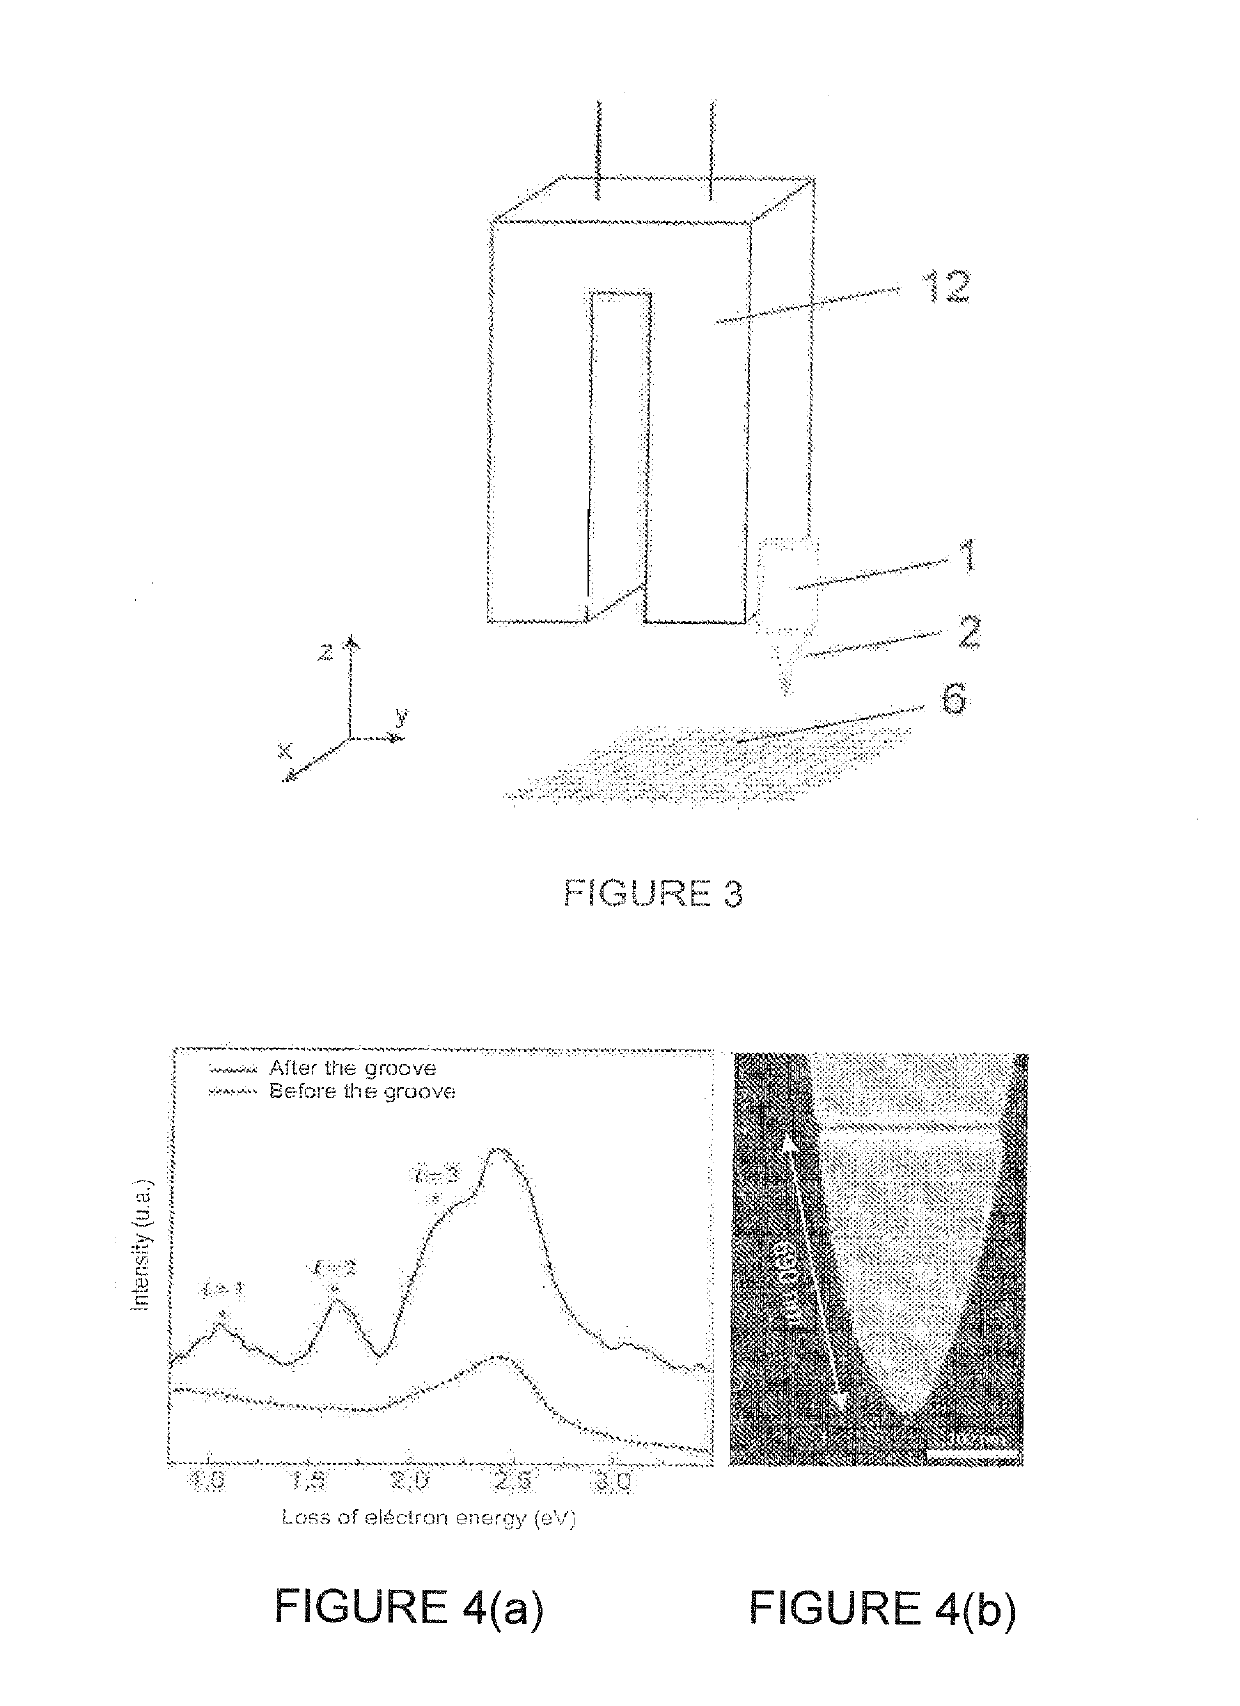 Metallic device for scanning near-field optical microscopy and spectroscopy and method for manufacturing same